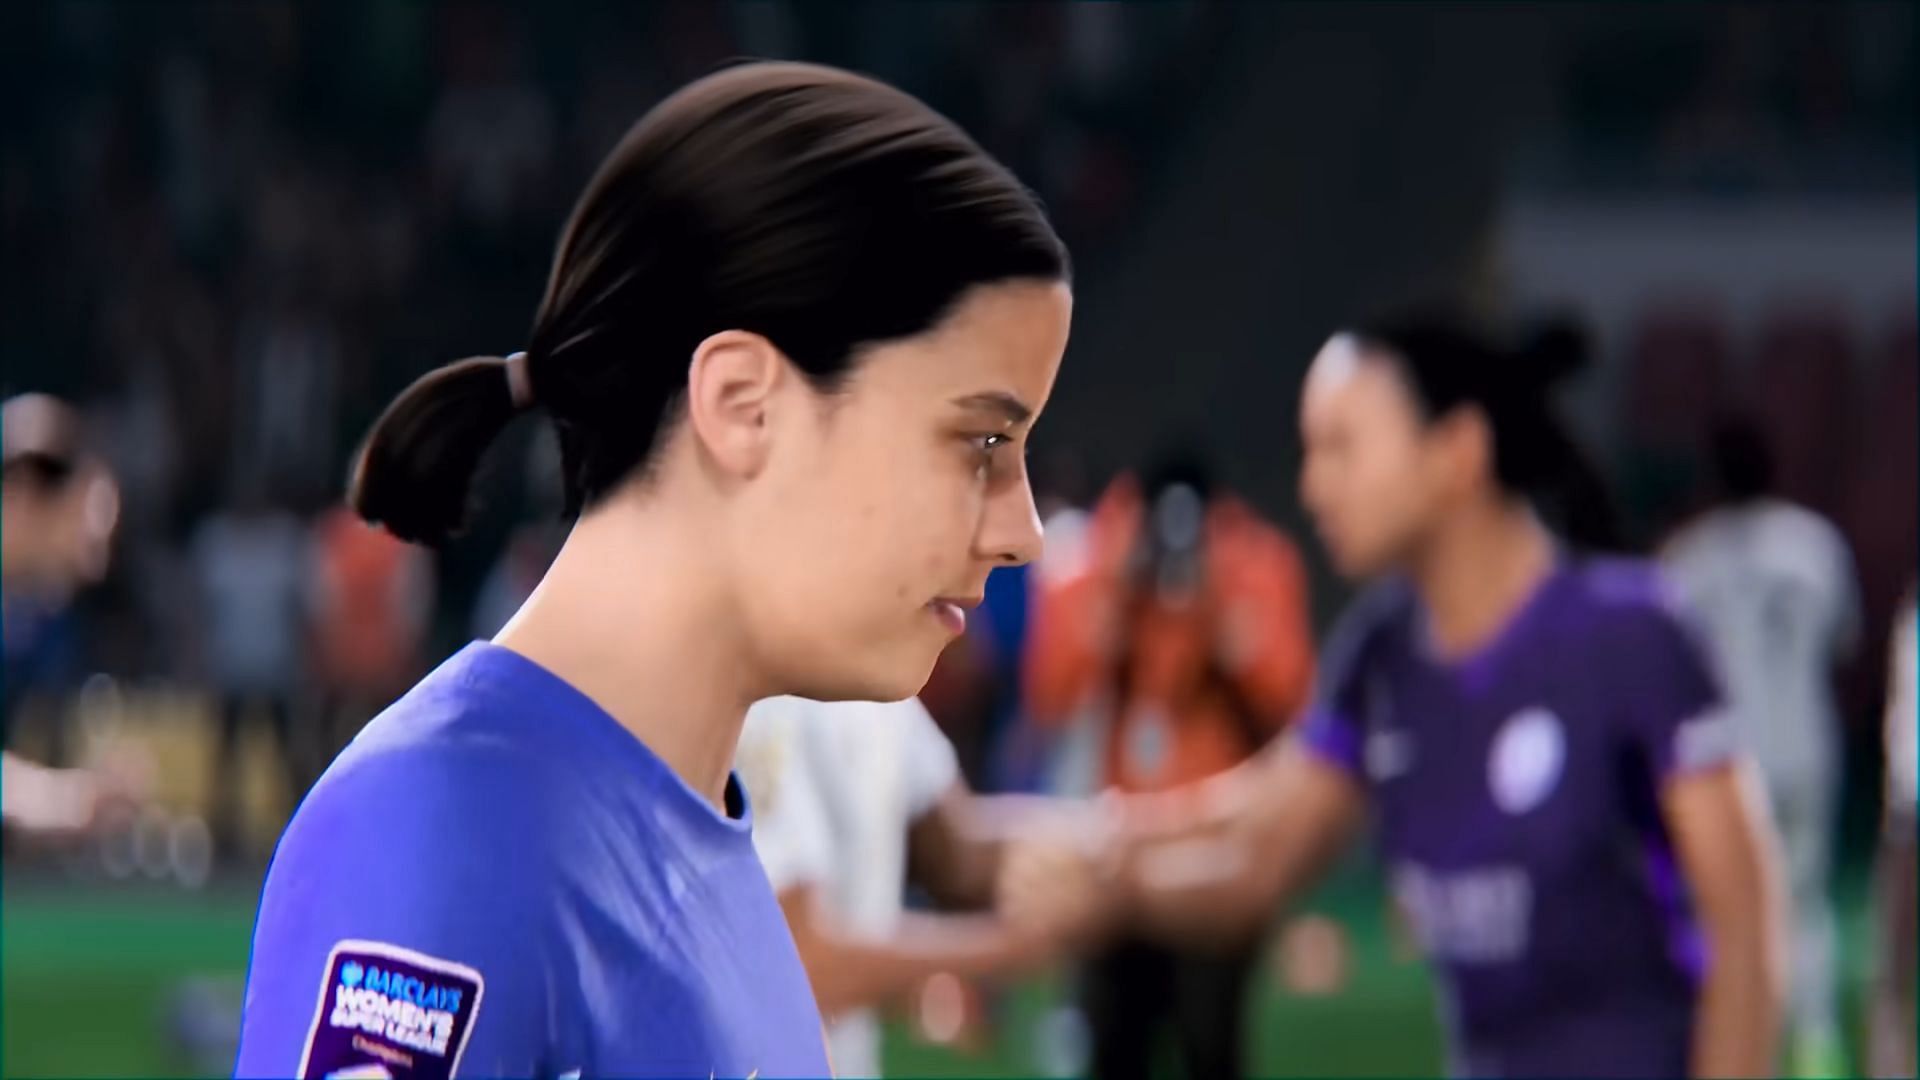 Maintaining a healthy social and competitive image could add layers to the open-world mode (Image via EA Sports)